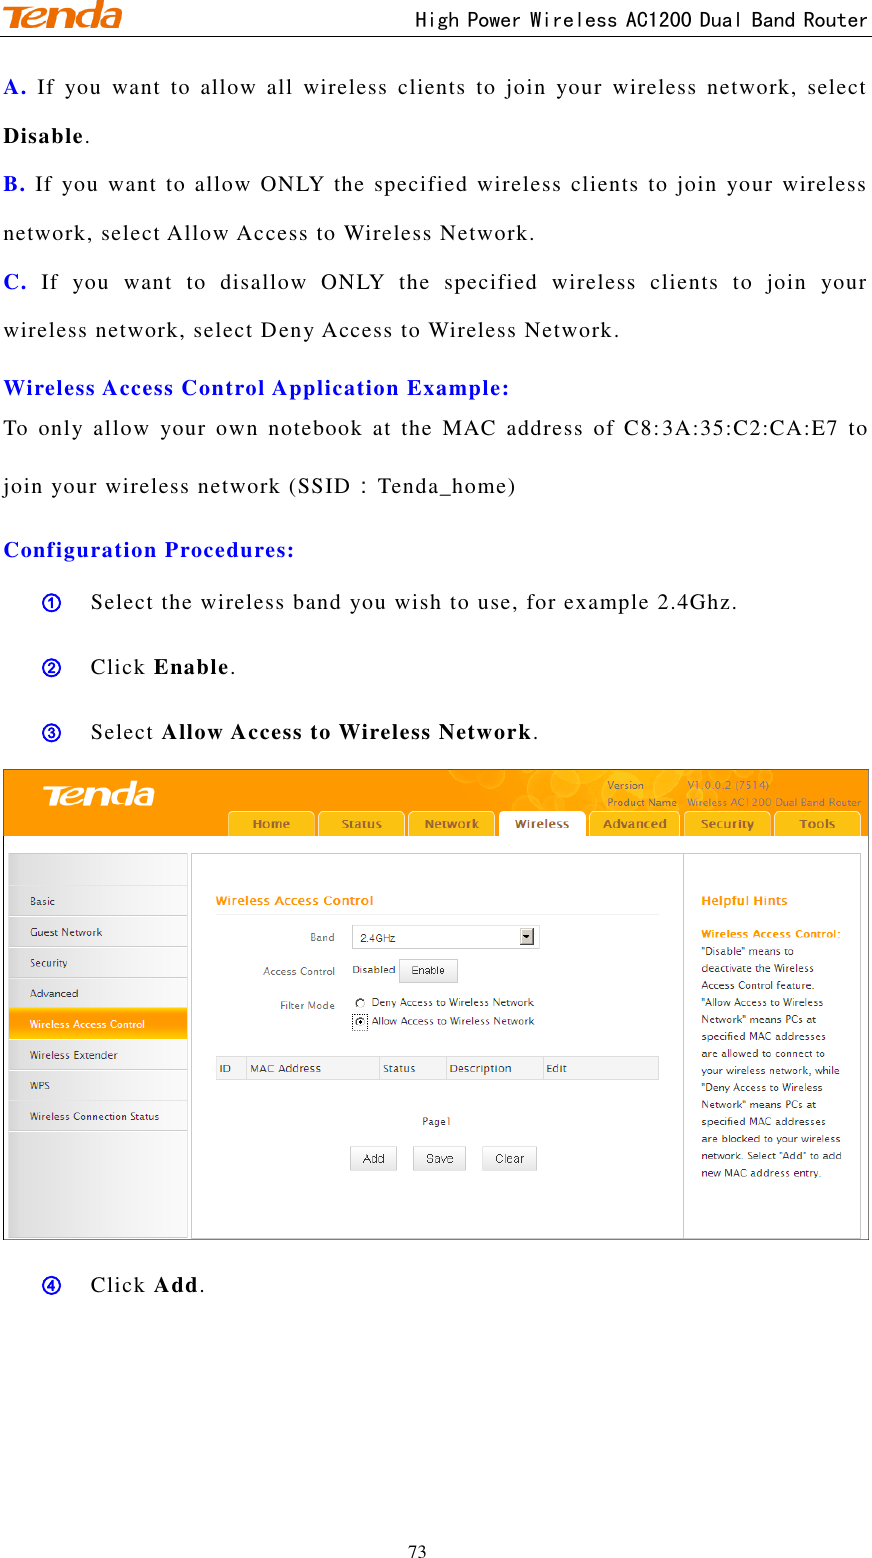                                     High Power Wireless AC1200 Dual Band Router 73 A. If  you  want  to  allow  all  wireless  clients  to  join  your  wireless  network,  select Disable.   B. If  you  want to allow ONLY  the specified  wireless clients to  join  your wireless network, select Allow Access to Wireless Network.   C. If  you  want  to  disallow  ONLY  the  specified  wireless  clients  to  join  your wireless network, select Deny Access to Wireless Network.   Wireless Access Control Application Example: To  only  allow  your  own  notebook  at  the  MAC  address  of  C8:3A:35:C2:CA:E7  to join your wireless network (SSID：Tenda_home)   Configuration Procedures: ① Select the wireless band you wish to use, for example 2.4Ghz.  ② Click Enable. ③ Select Allow Access to Wireless Network.  ④ Click Add. 